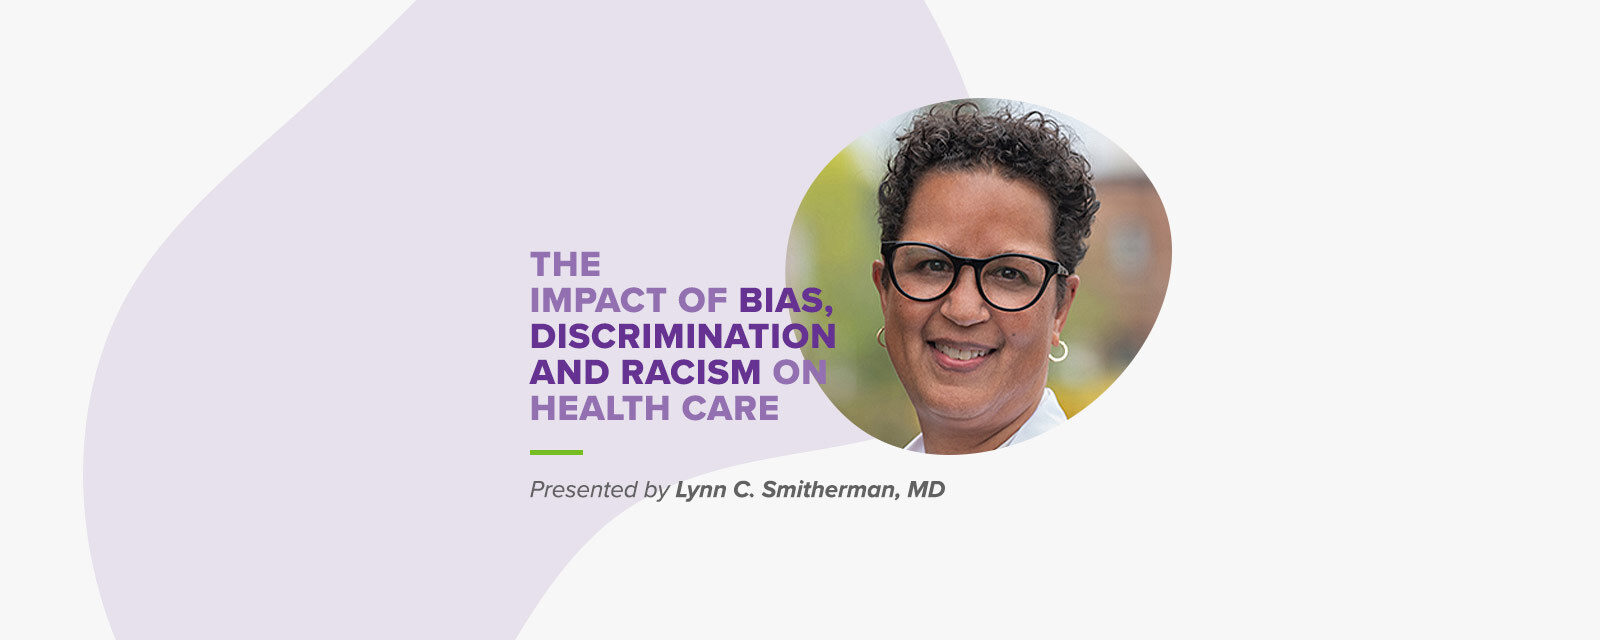 Revisiting: The Impact of Bias, Discrimination and Racism on Health Care